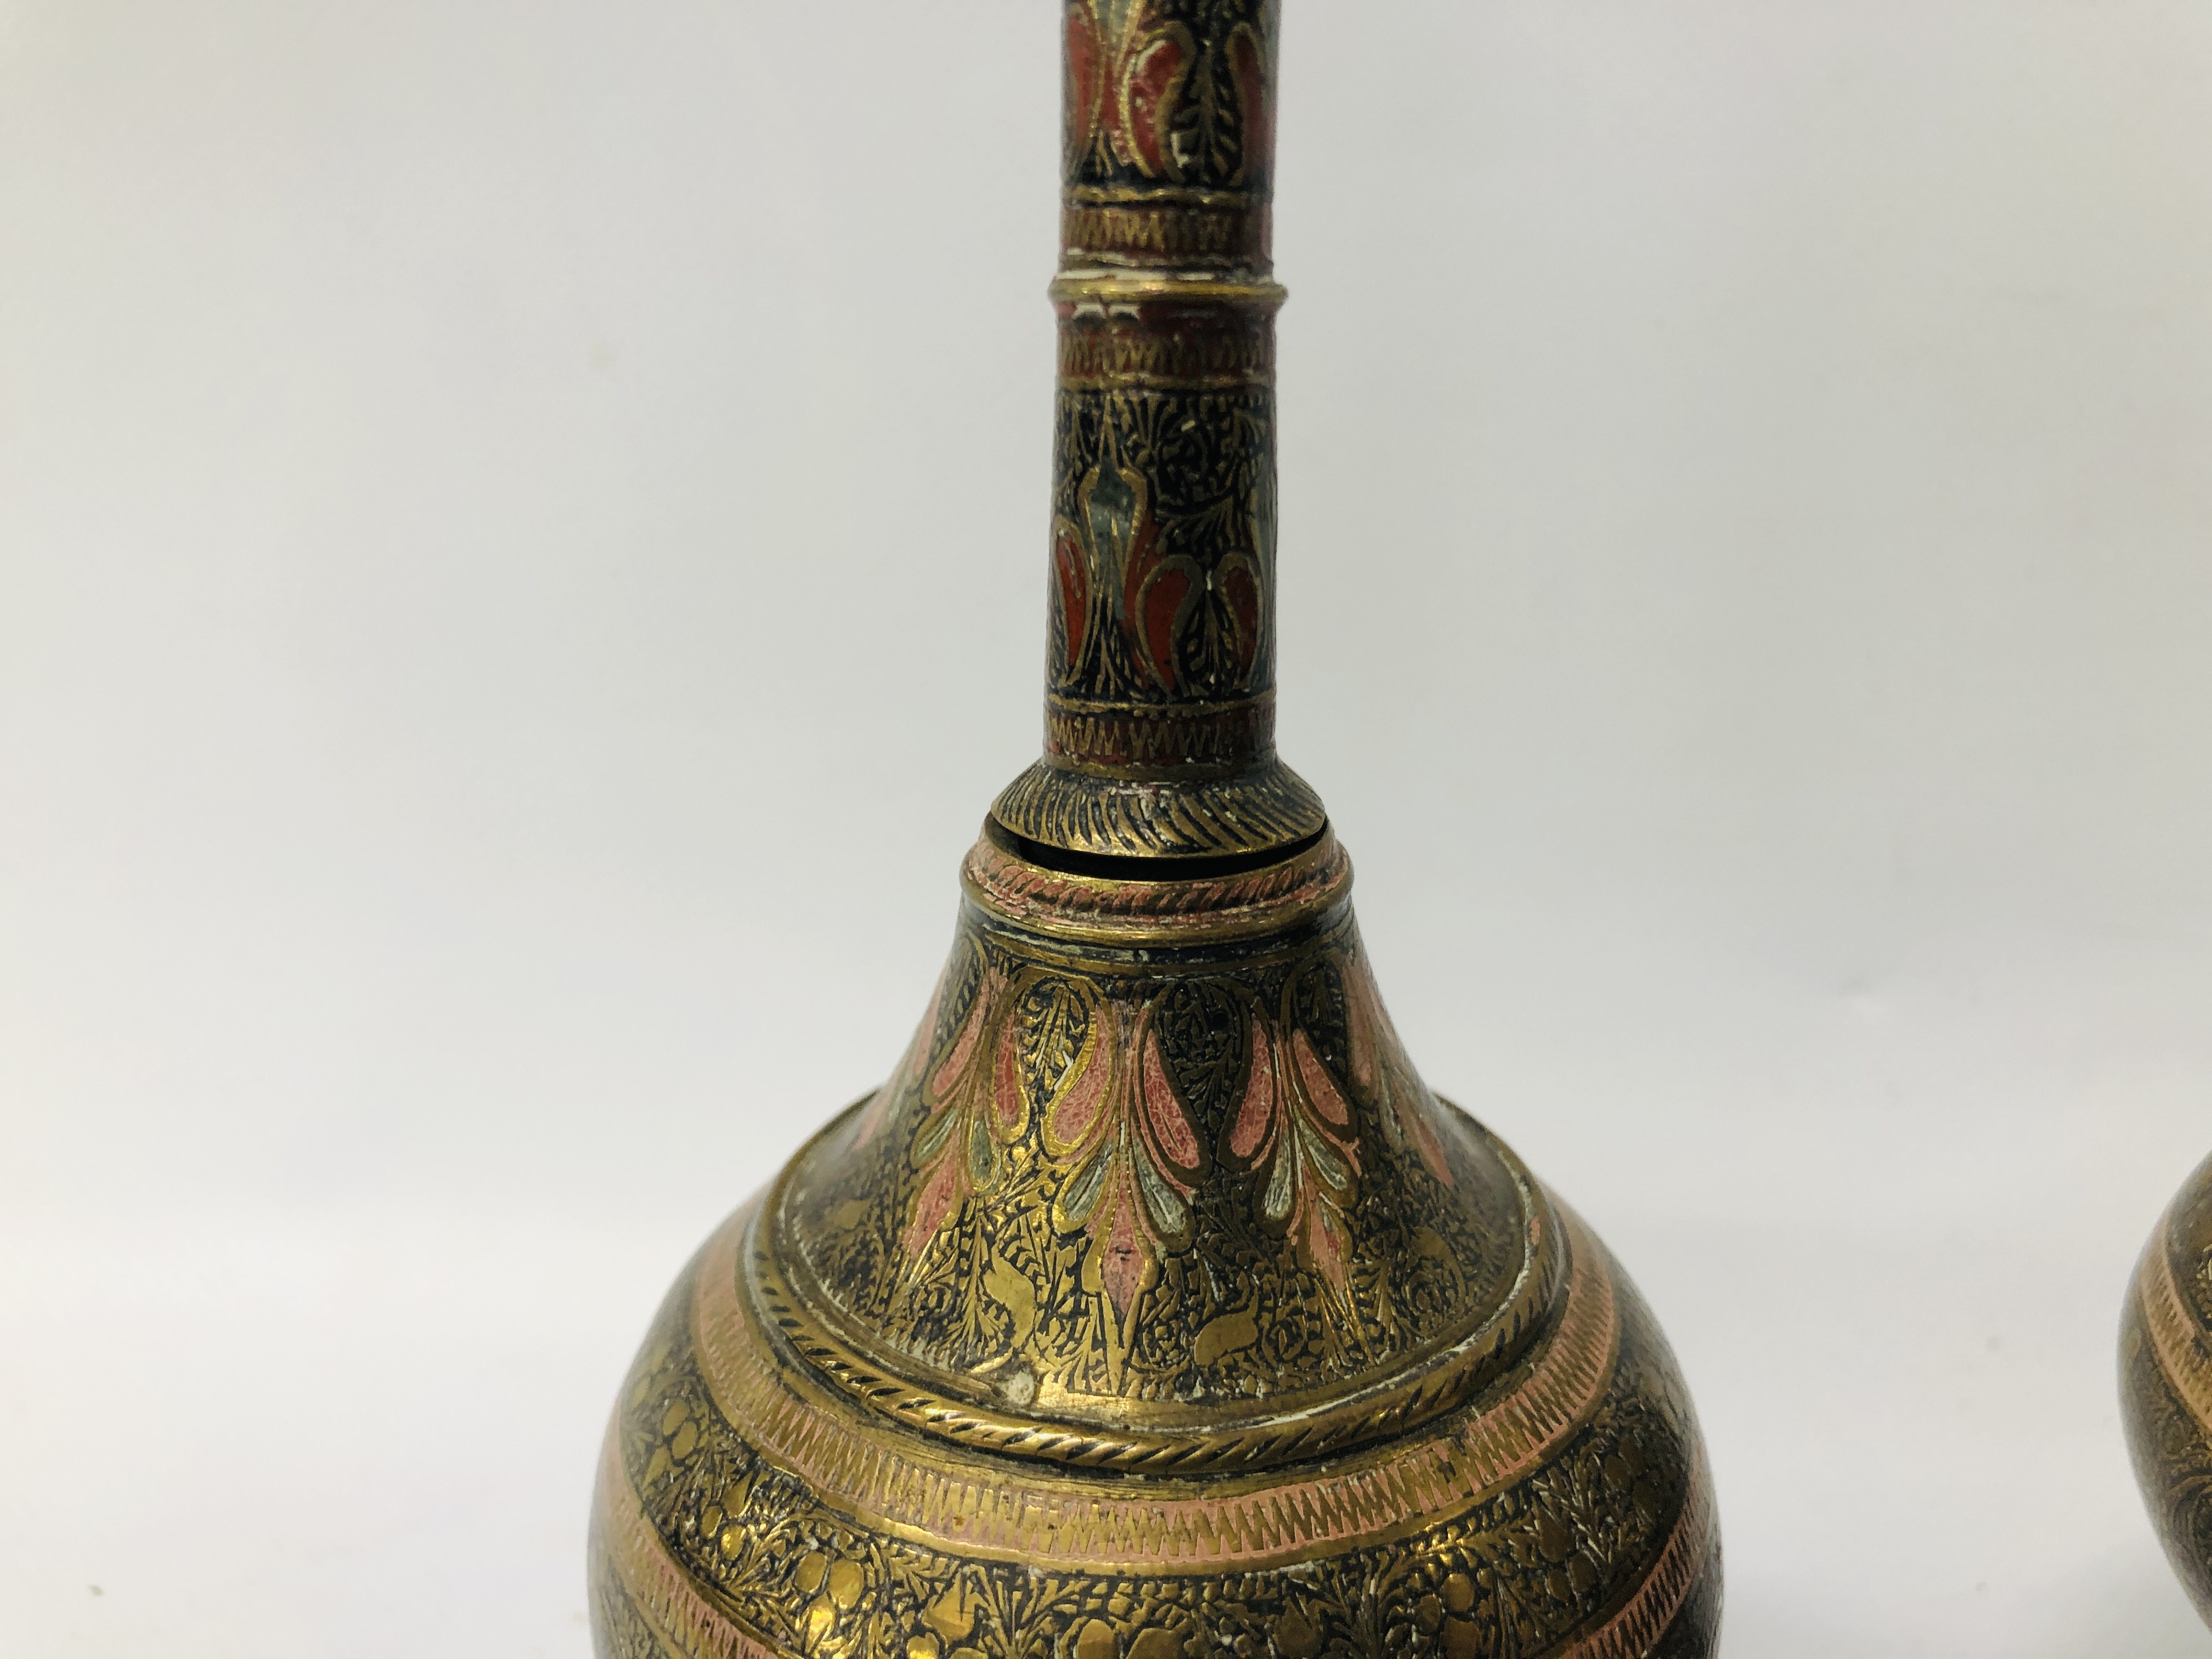 MIXED BRASS AND COPPER TO INCLUDE OIL LAMPS, LAMPS, STOVE, TRIVET, WATERING CAN, SCALES, CUPS, - Image 26 of 27